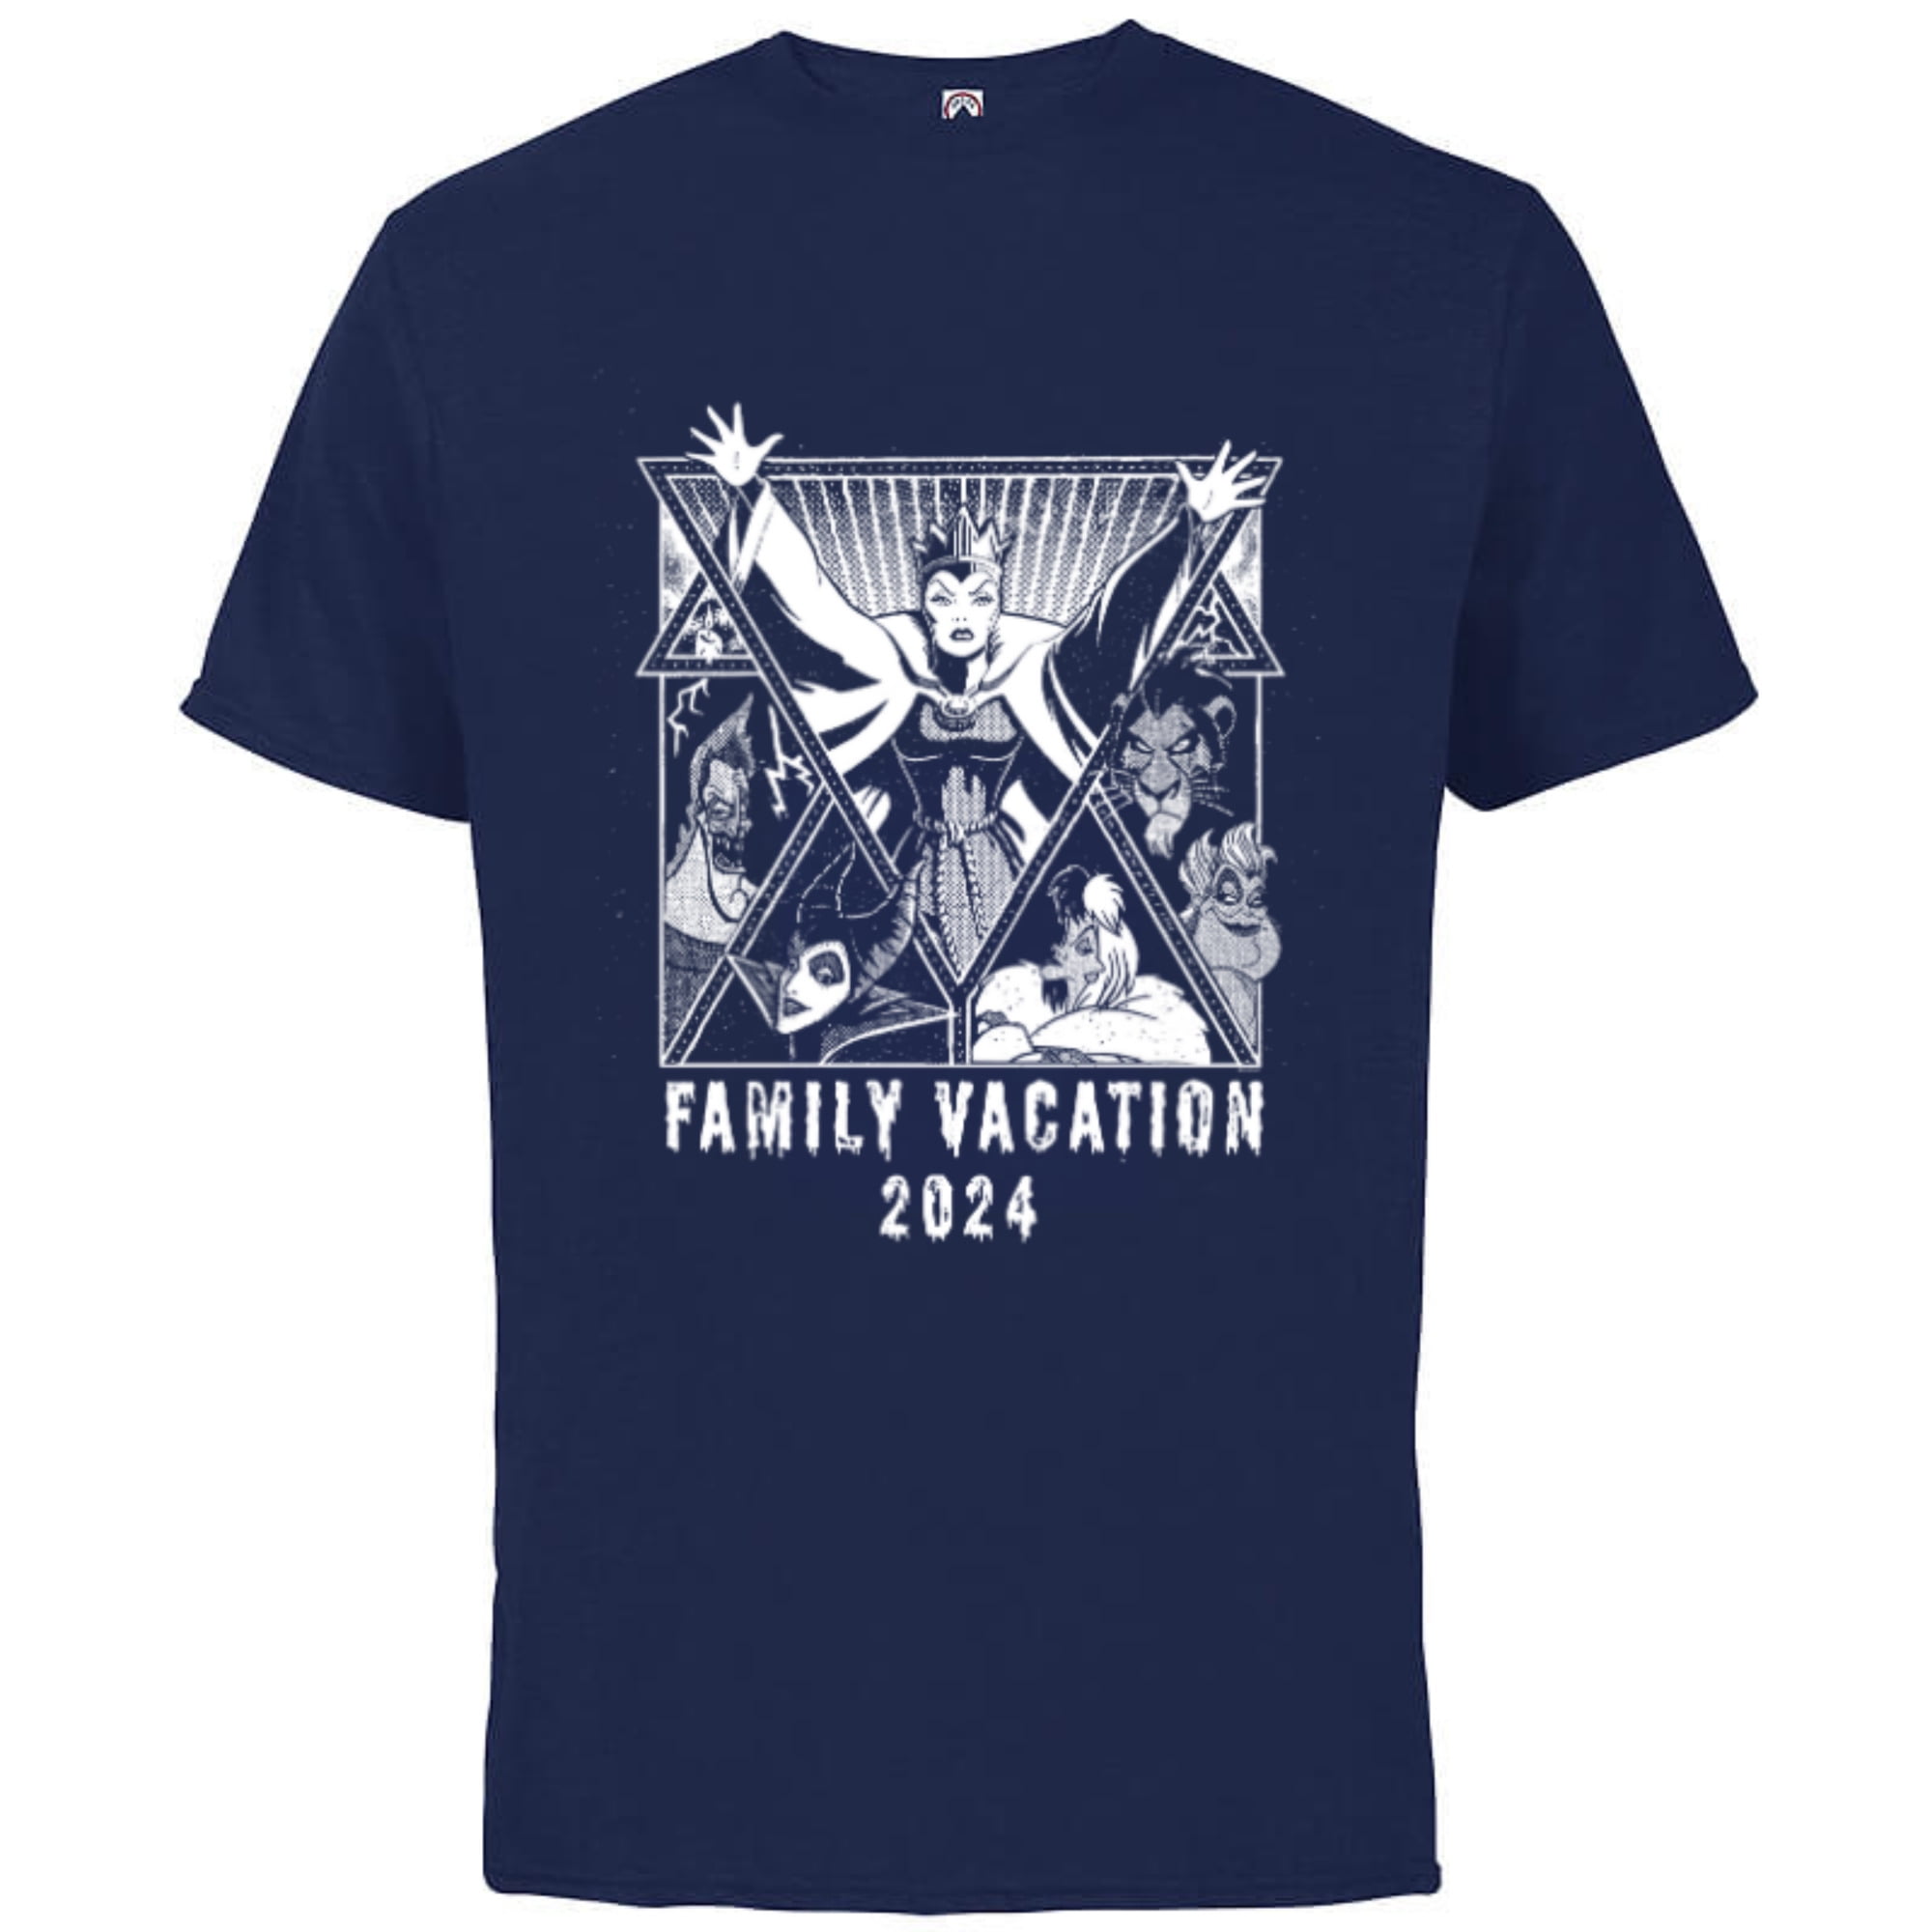 T-Shirt Navy Sleeve Customized-Athletic 2024 Vacation Graphic Print - Adults Cotton - Family Trip Disney Short Villains for